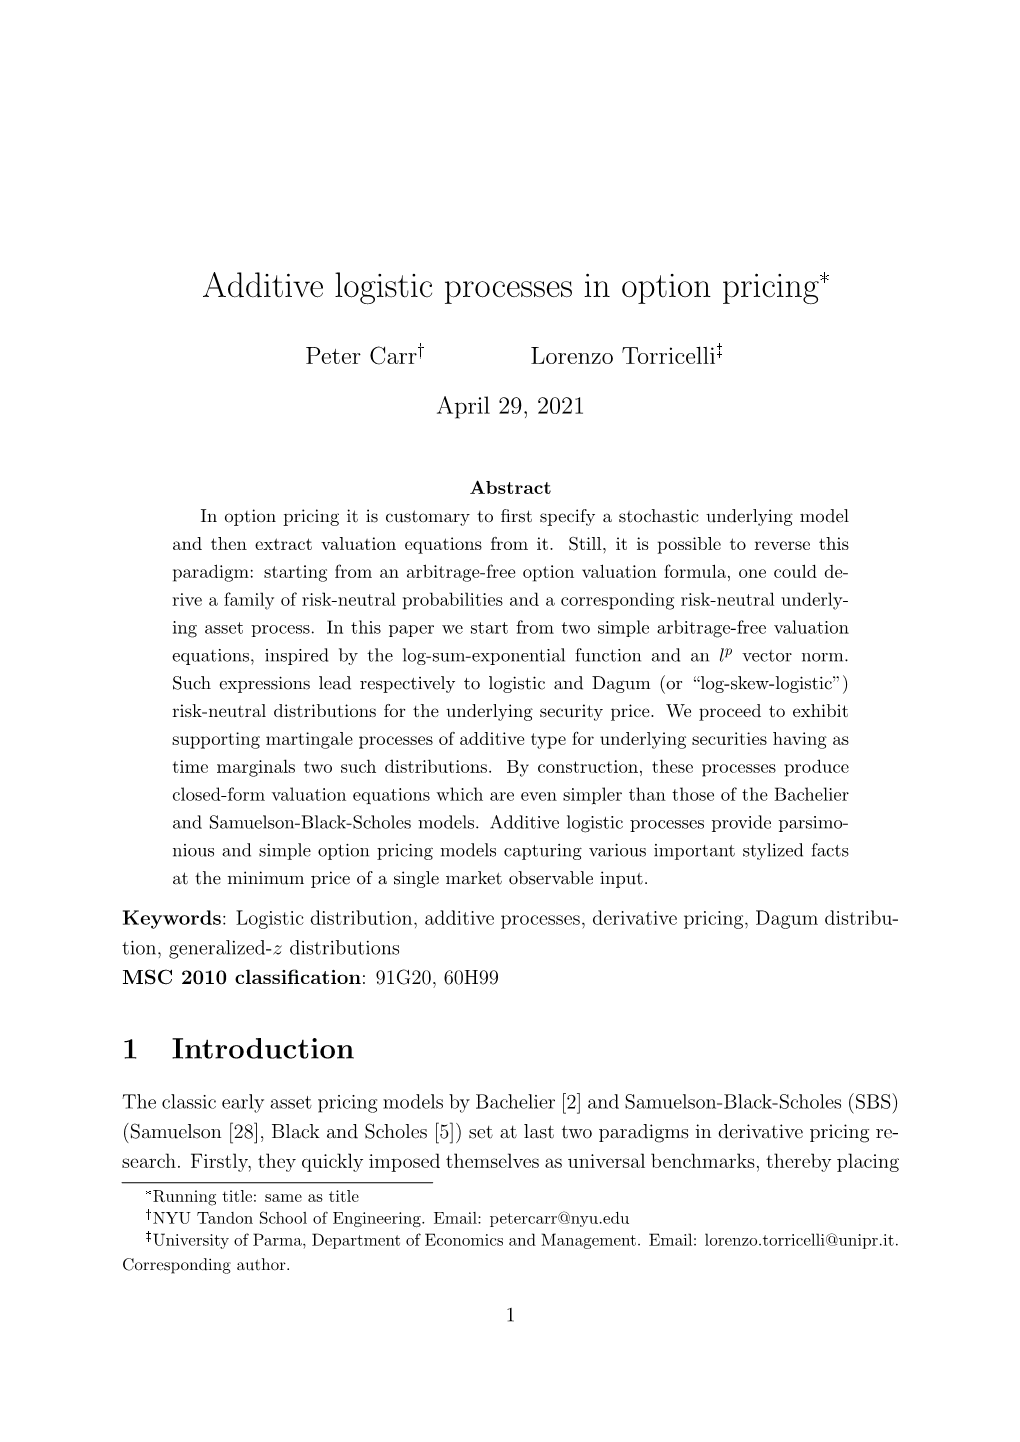 Additive Logistic Processes in Option Pricing*